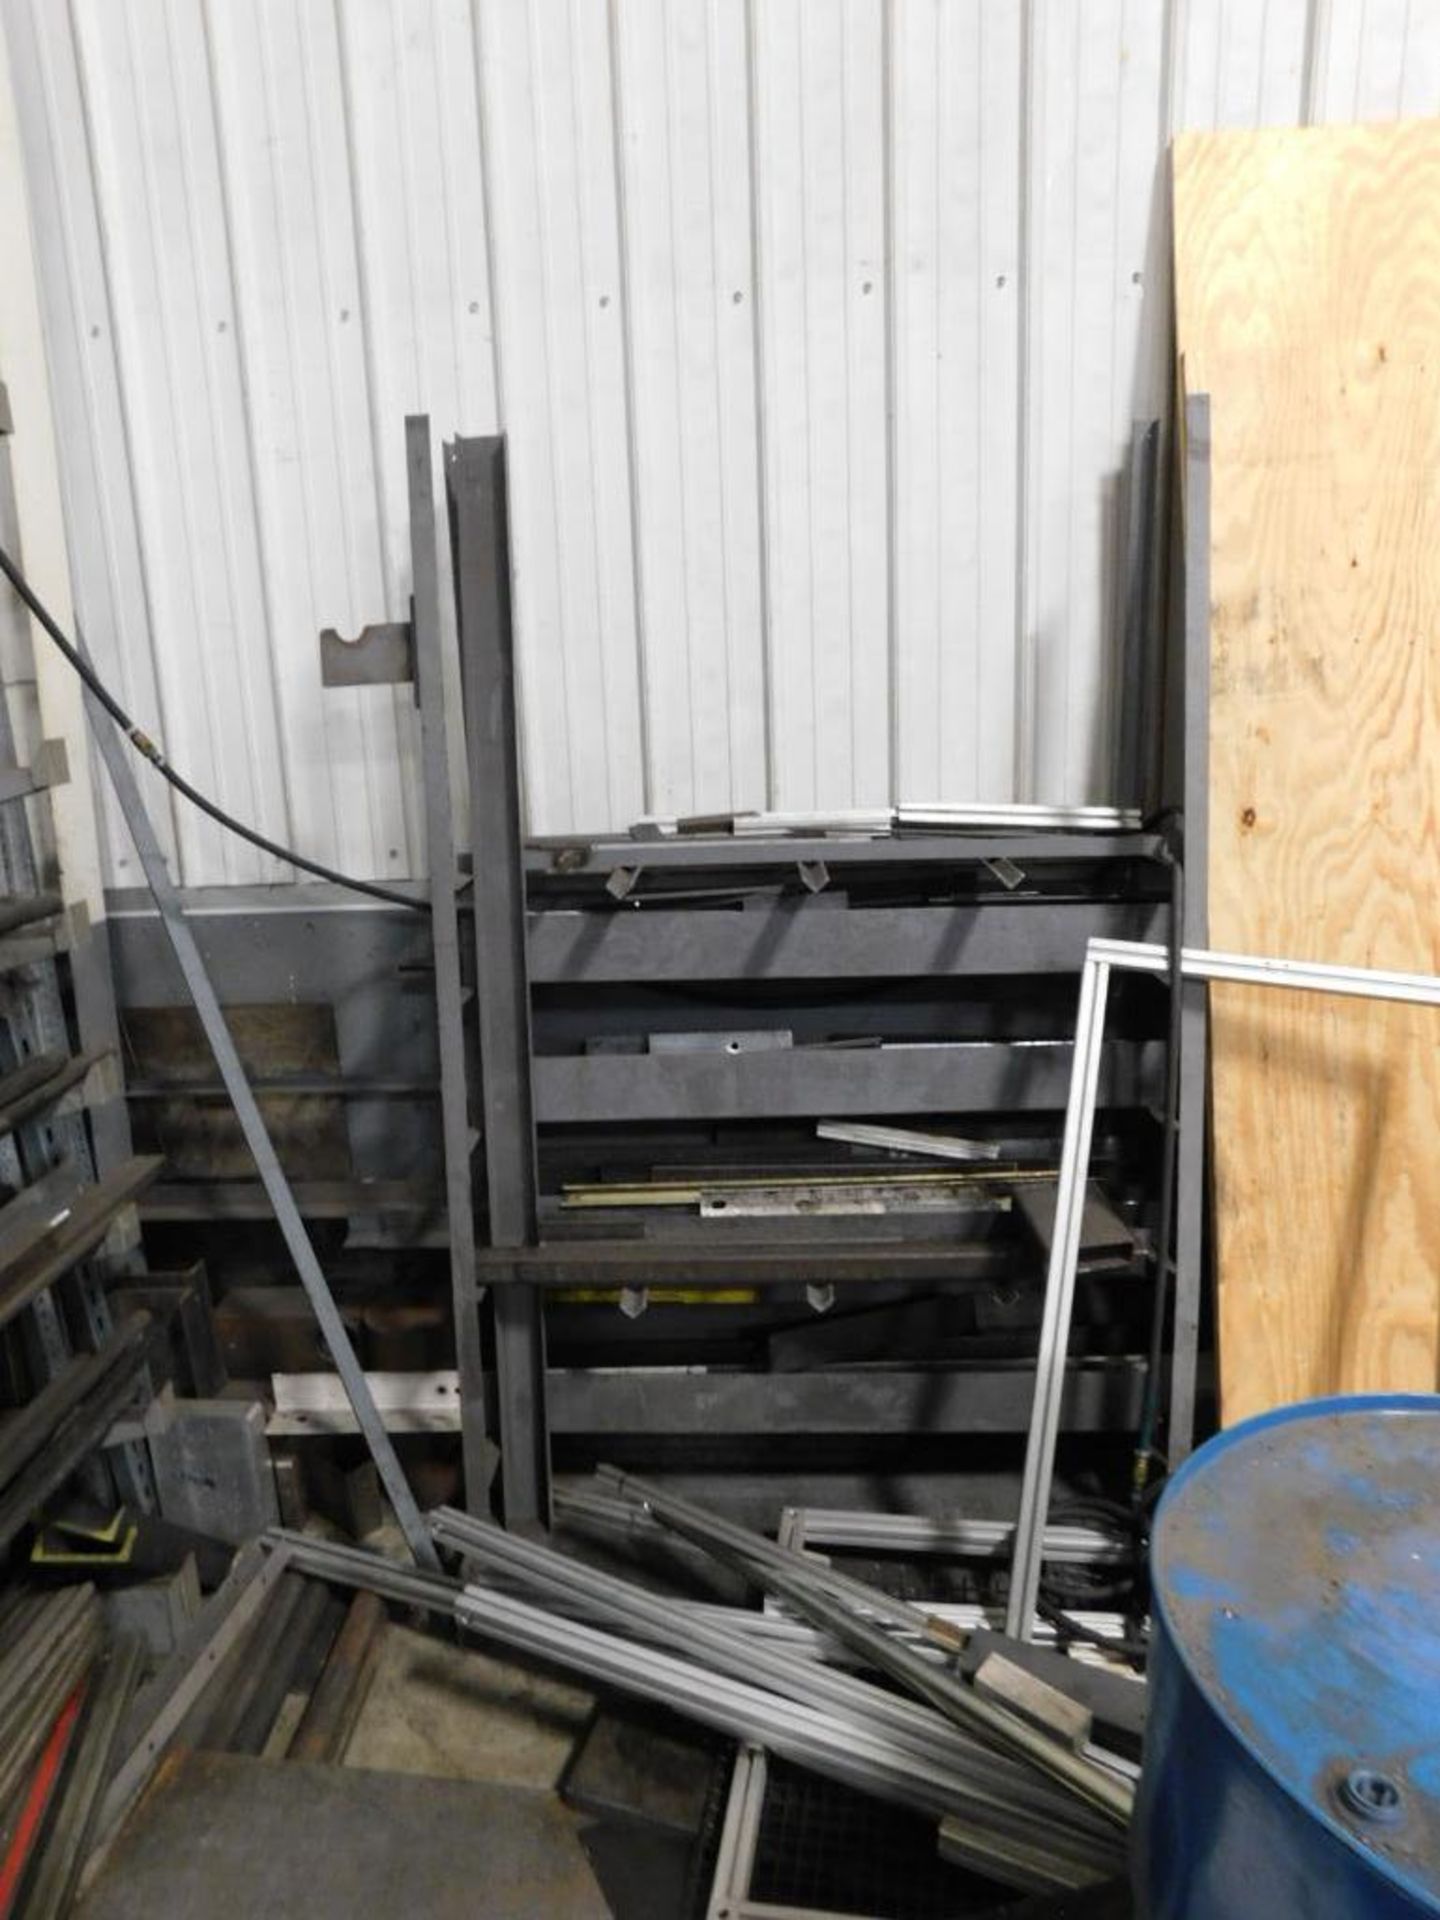 LOT: Large Quantity of Scrap on Material Racks & Carts (LOCATED IN MACHINE SHOP & MAINTENANCE ROOM) - Image 5 of 8